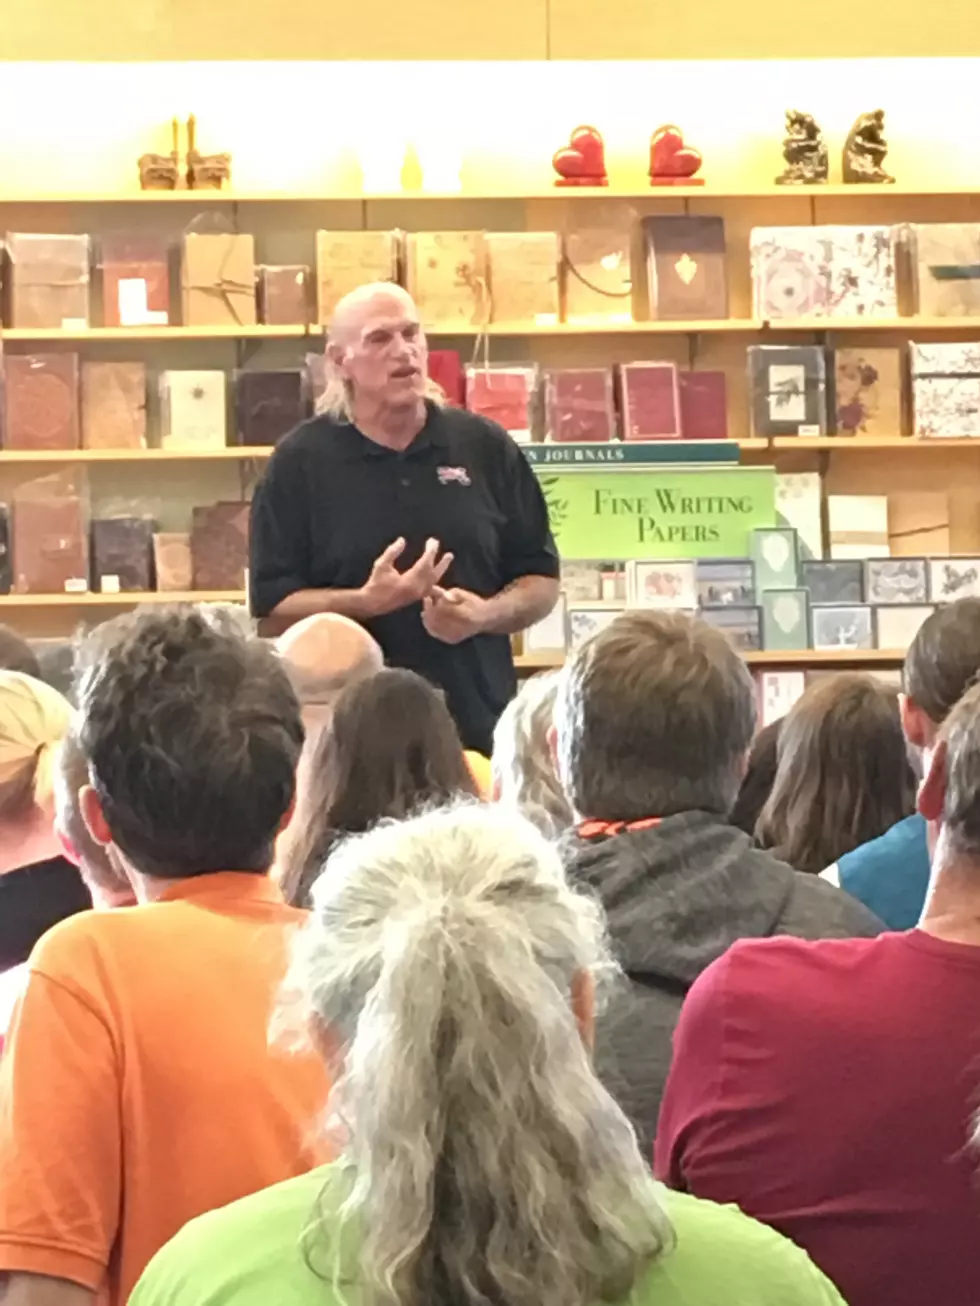 4 Things We Learned From Jesse Ventura’s Visit To Rochester